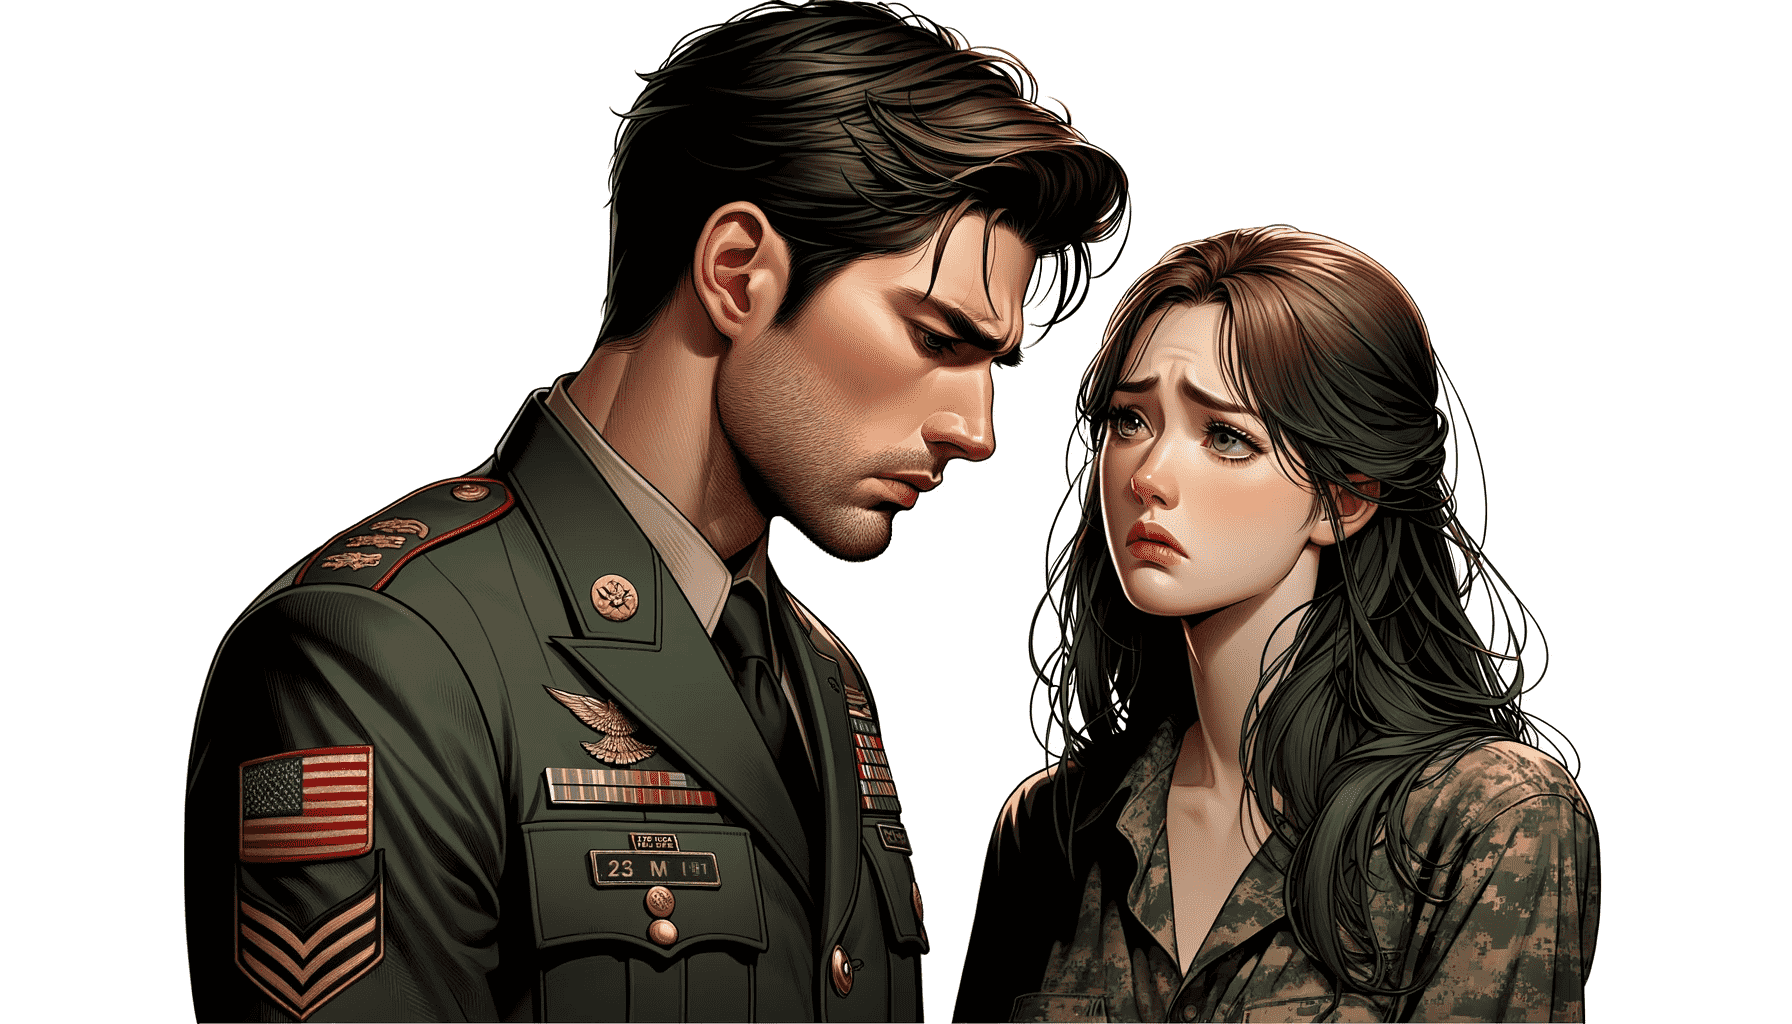 Military man with an upset girlfriend